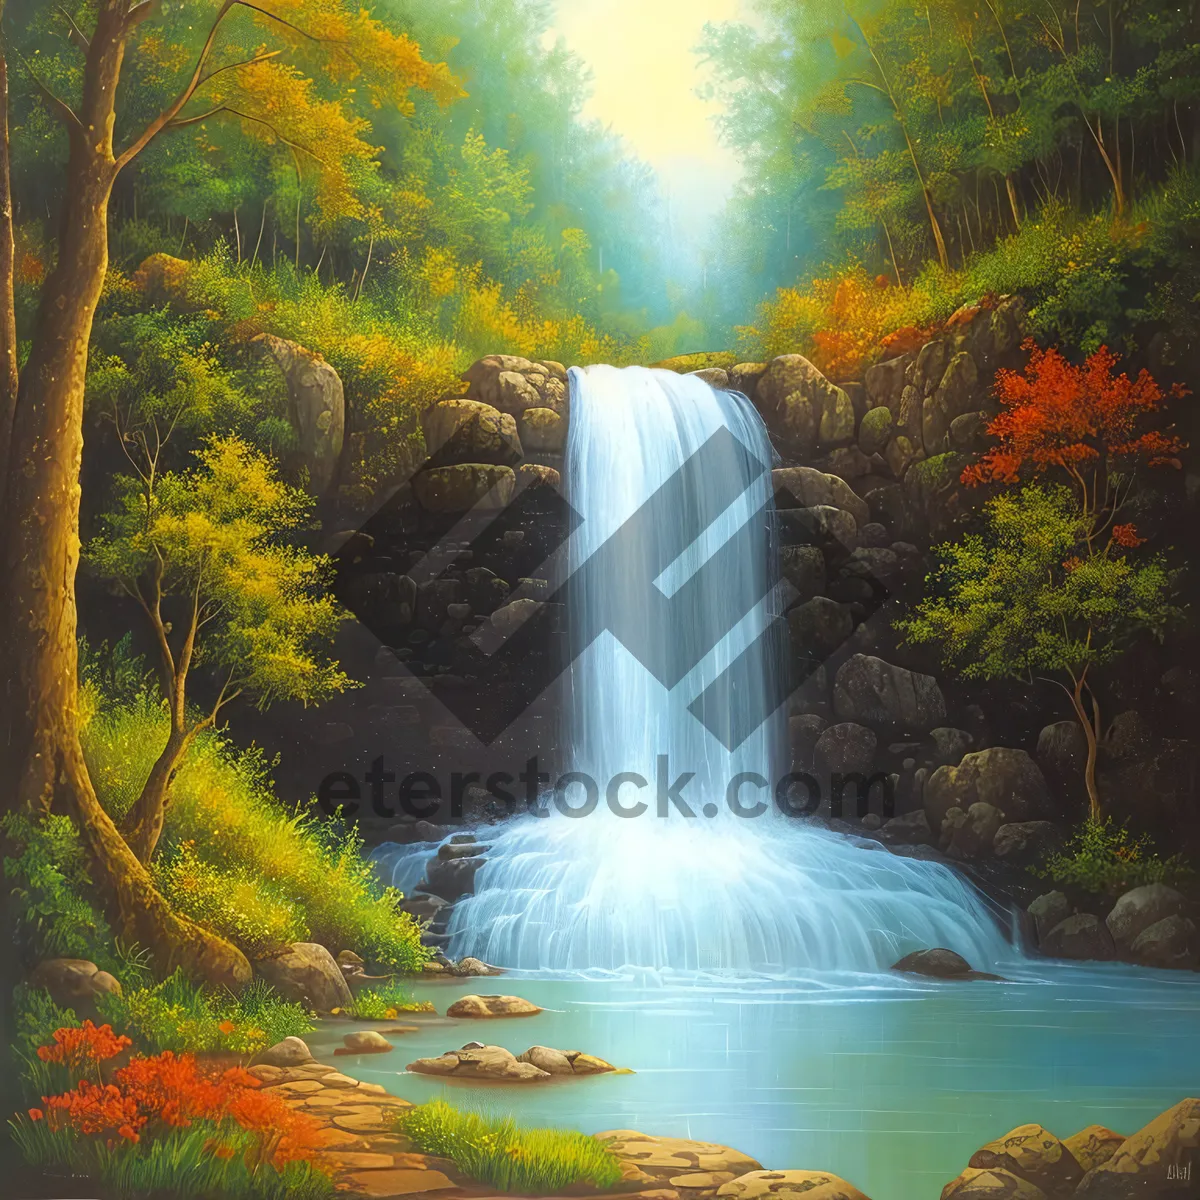 Picture of Cascade Creek Waterfall in Serene Mountain Forest